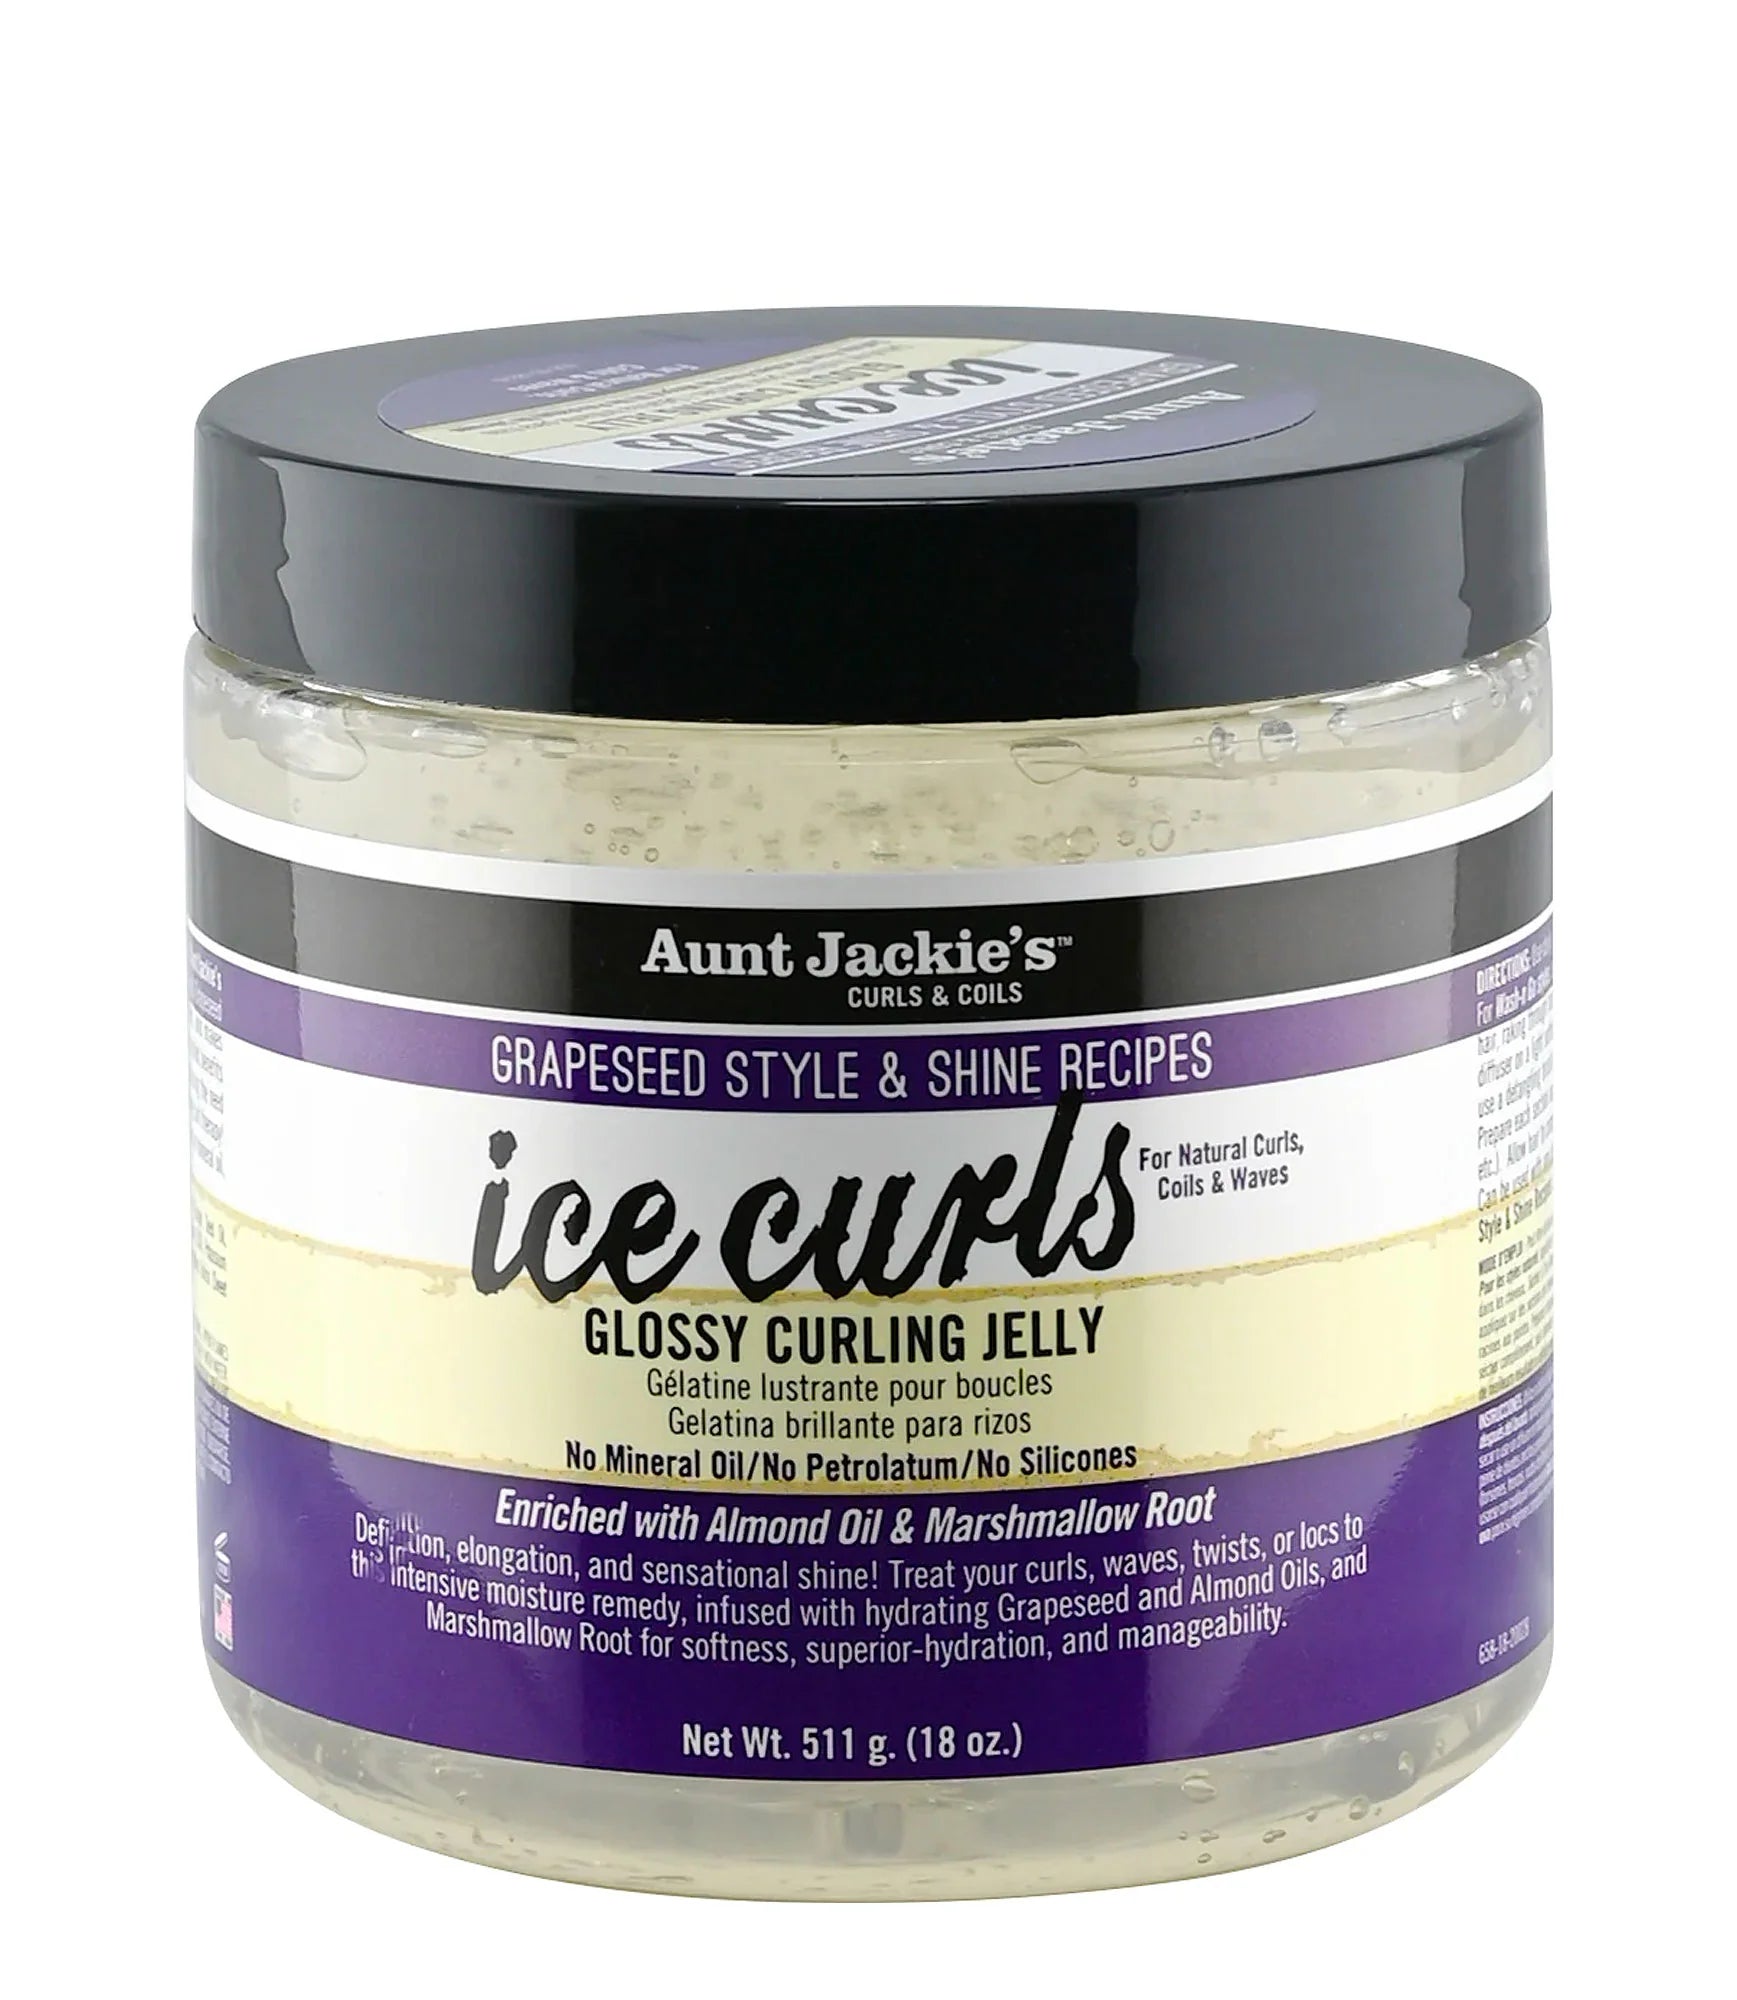 Aunt Jackie’s – Ice Curls Glossy Curling Jelly